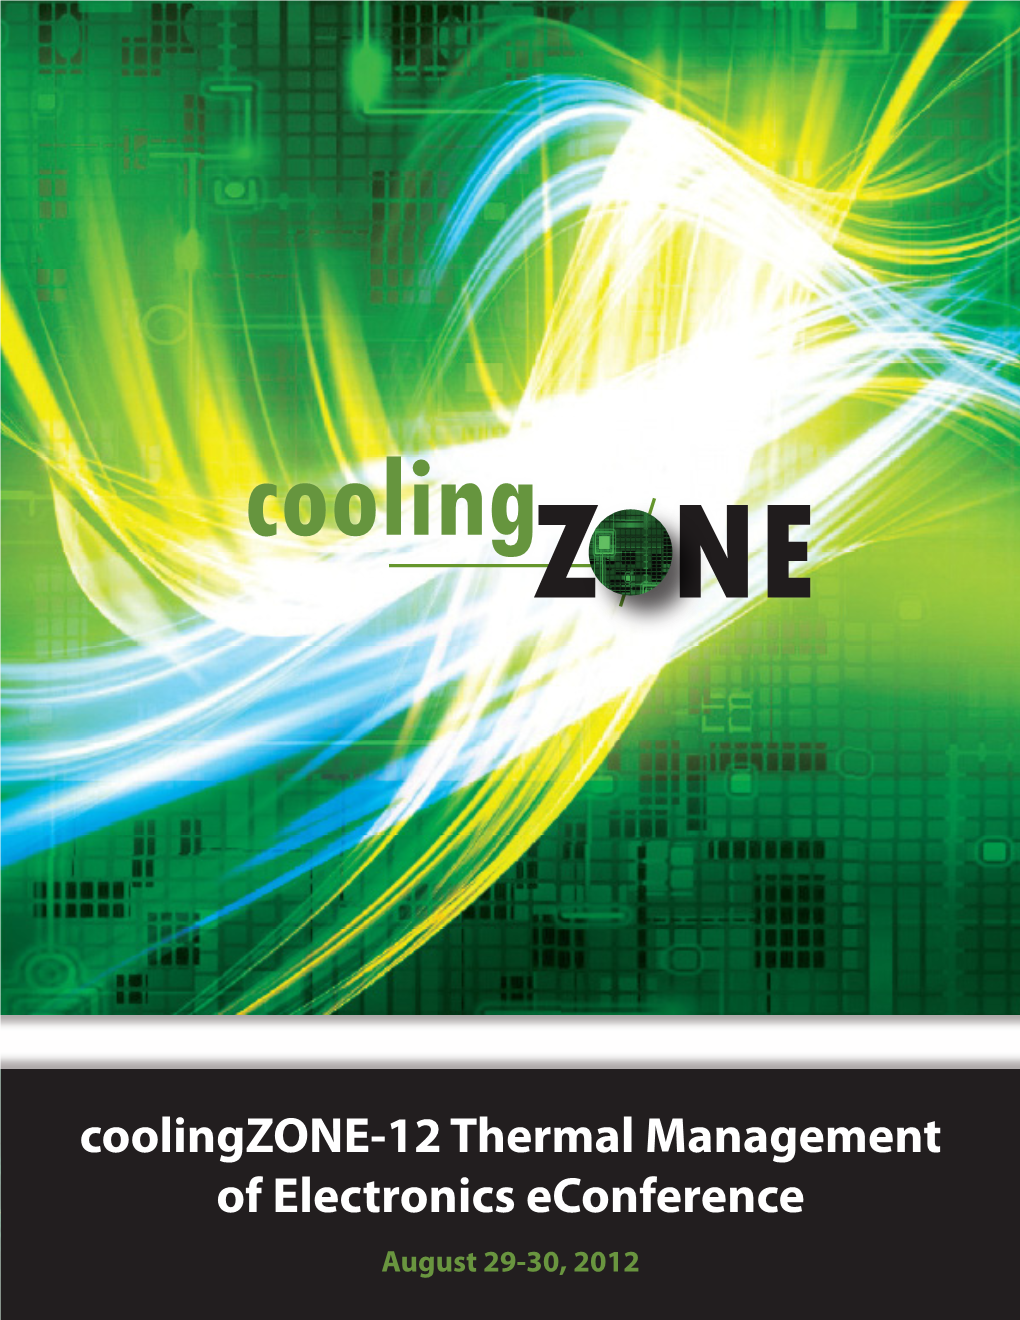 Coolingzone-12 Thermal Management of Electronics Econference August 29-30, 2012 Thermal Management of Electronics Econference August 29-30, 2012